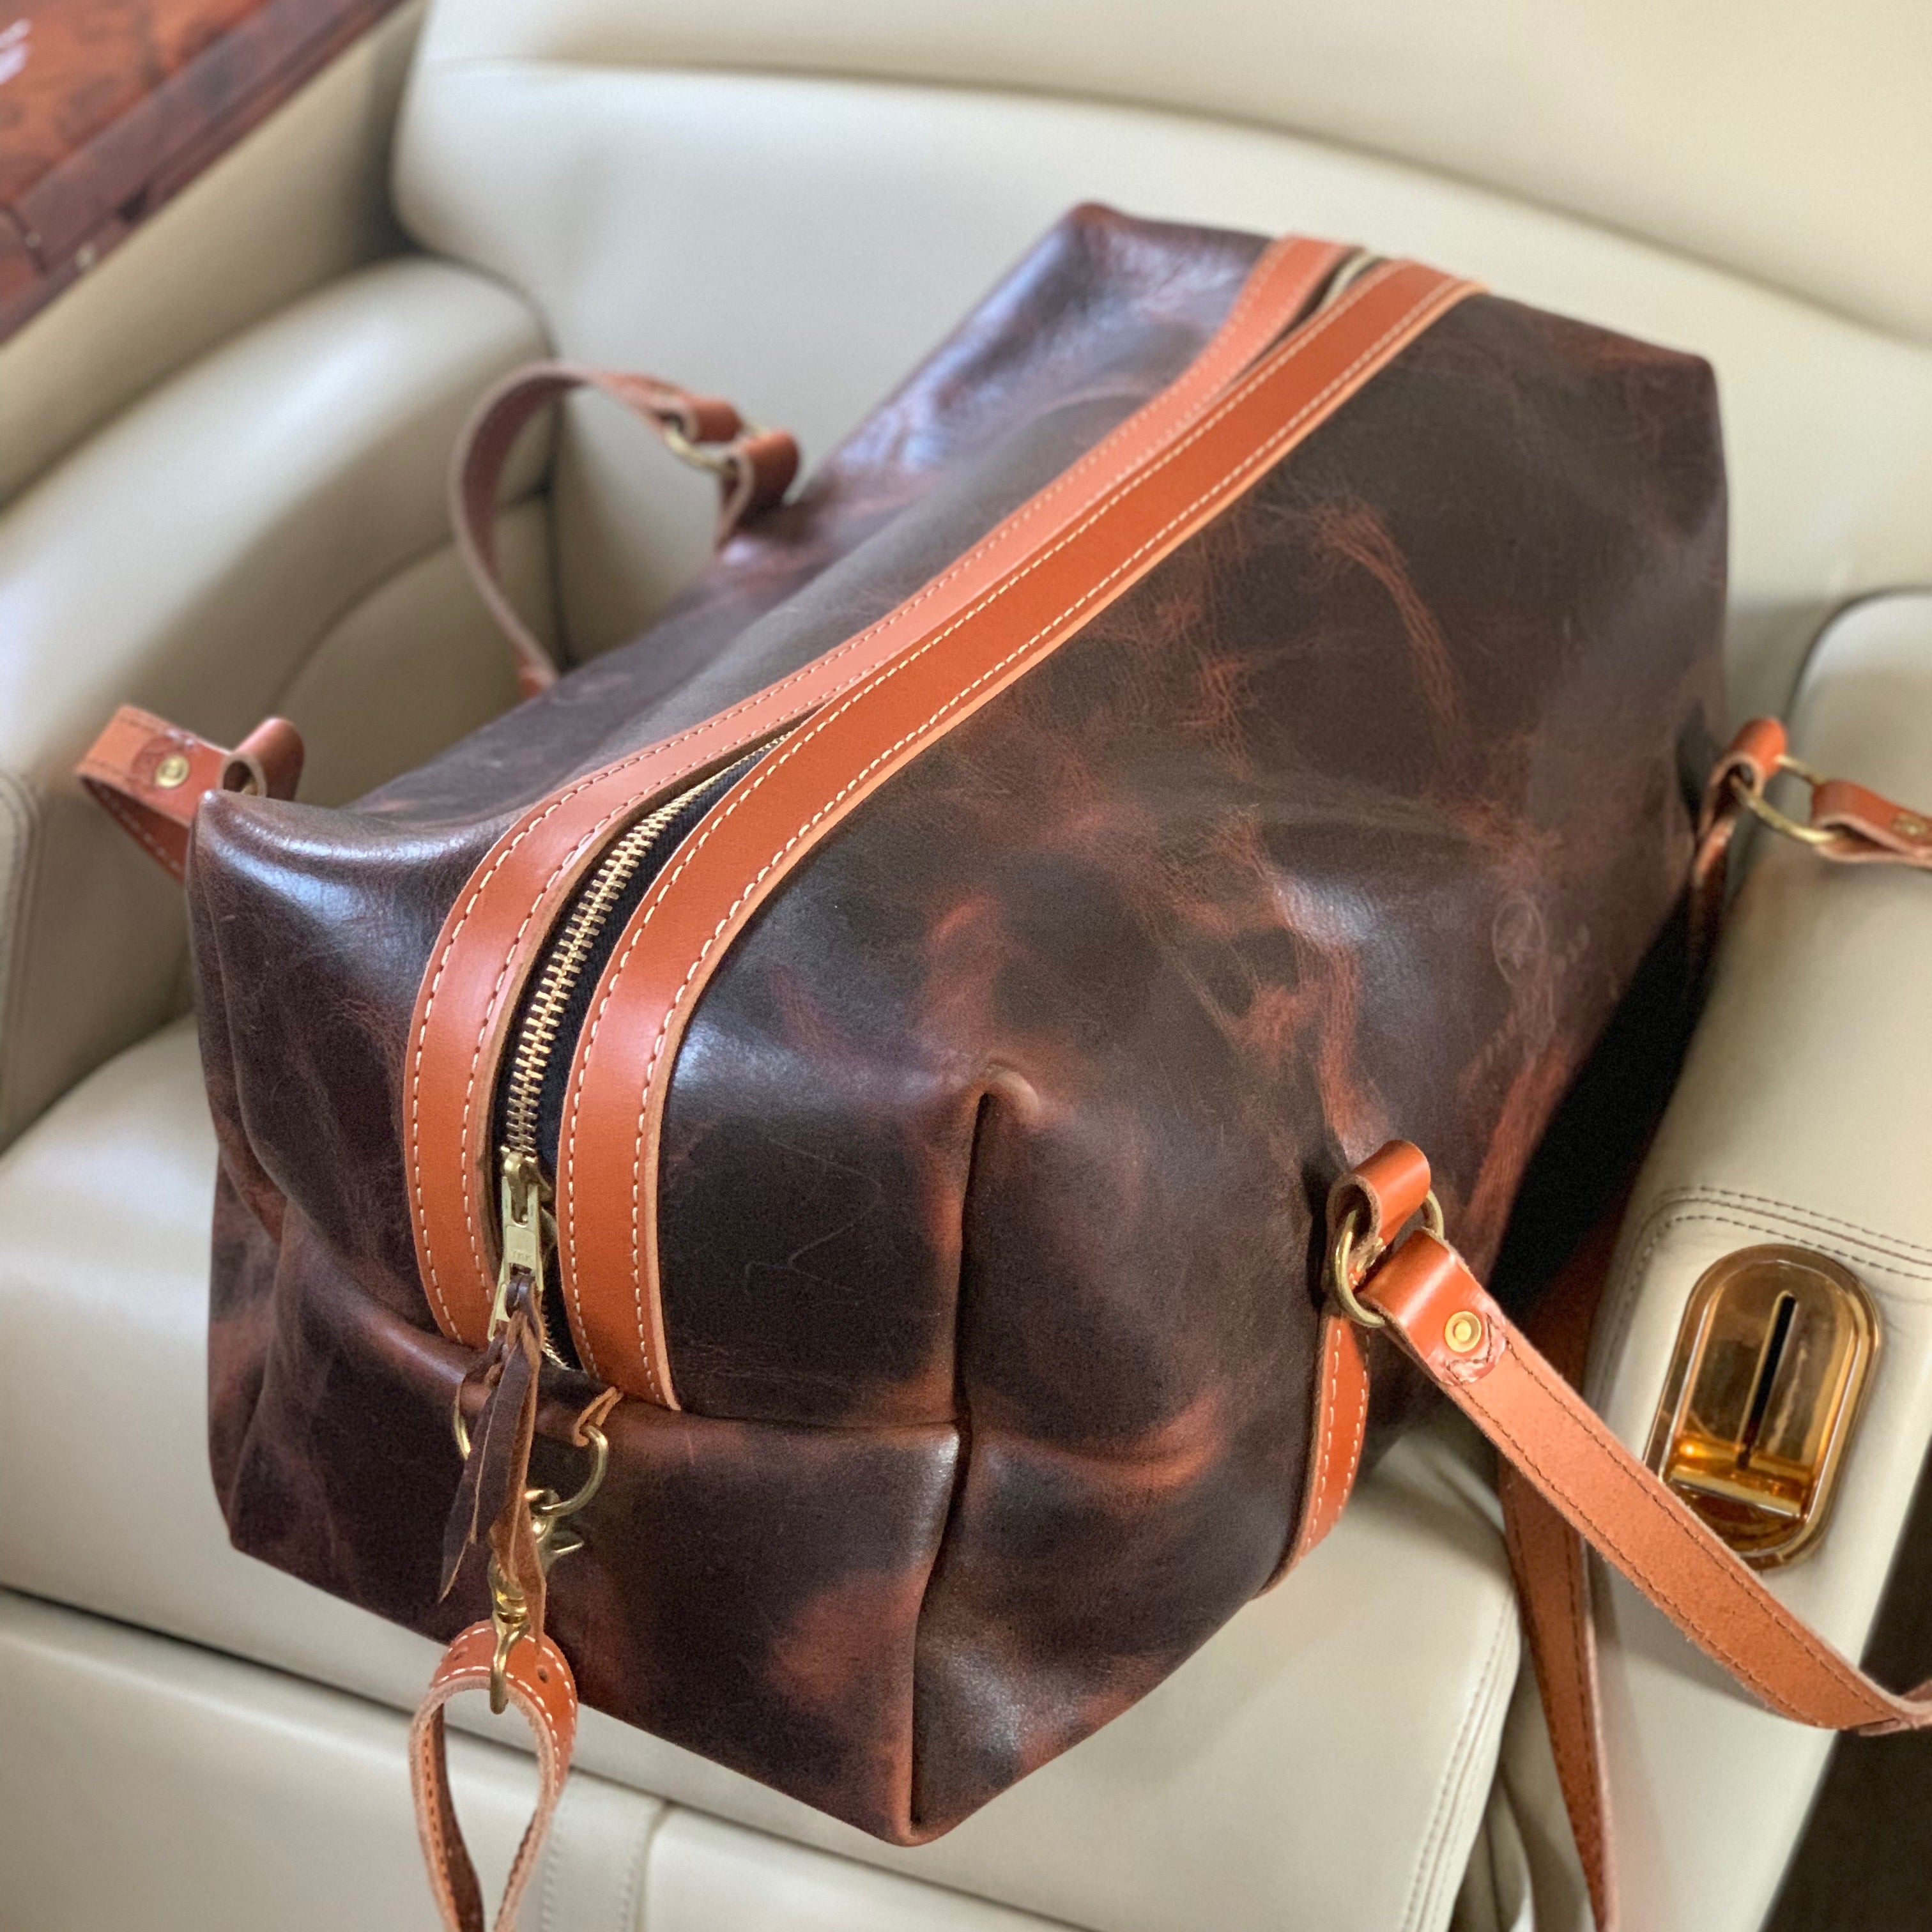 Panhandle Red Company specializing in Leather Goods, Handbags, Totes, Purses, Everyday Carry Needs, and more. Full-grain leather items, custom gifts, all Handcrafted in Idaho, USA.